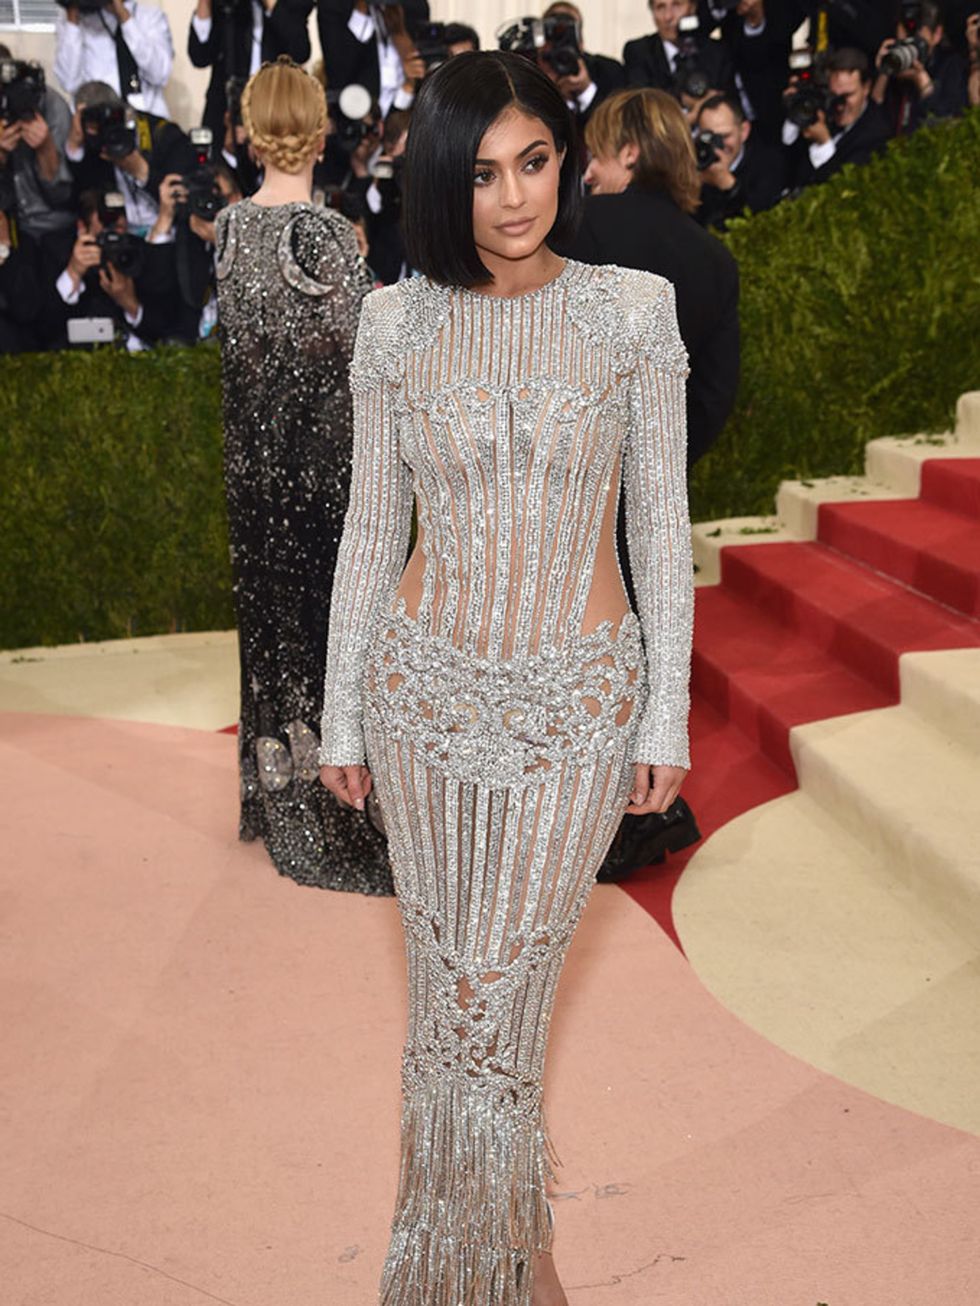 kylie jenner at the met gala in new york may 2016